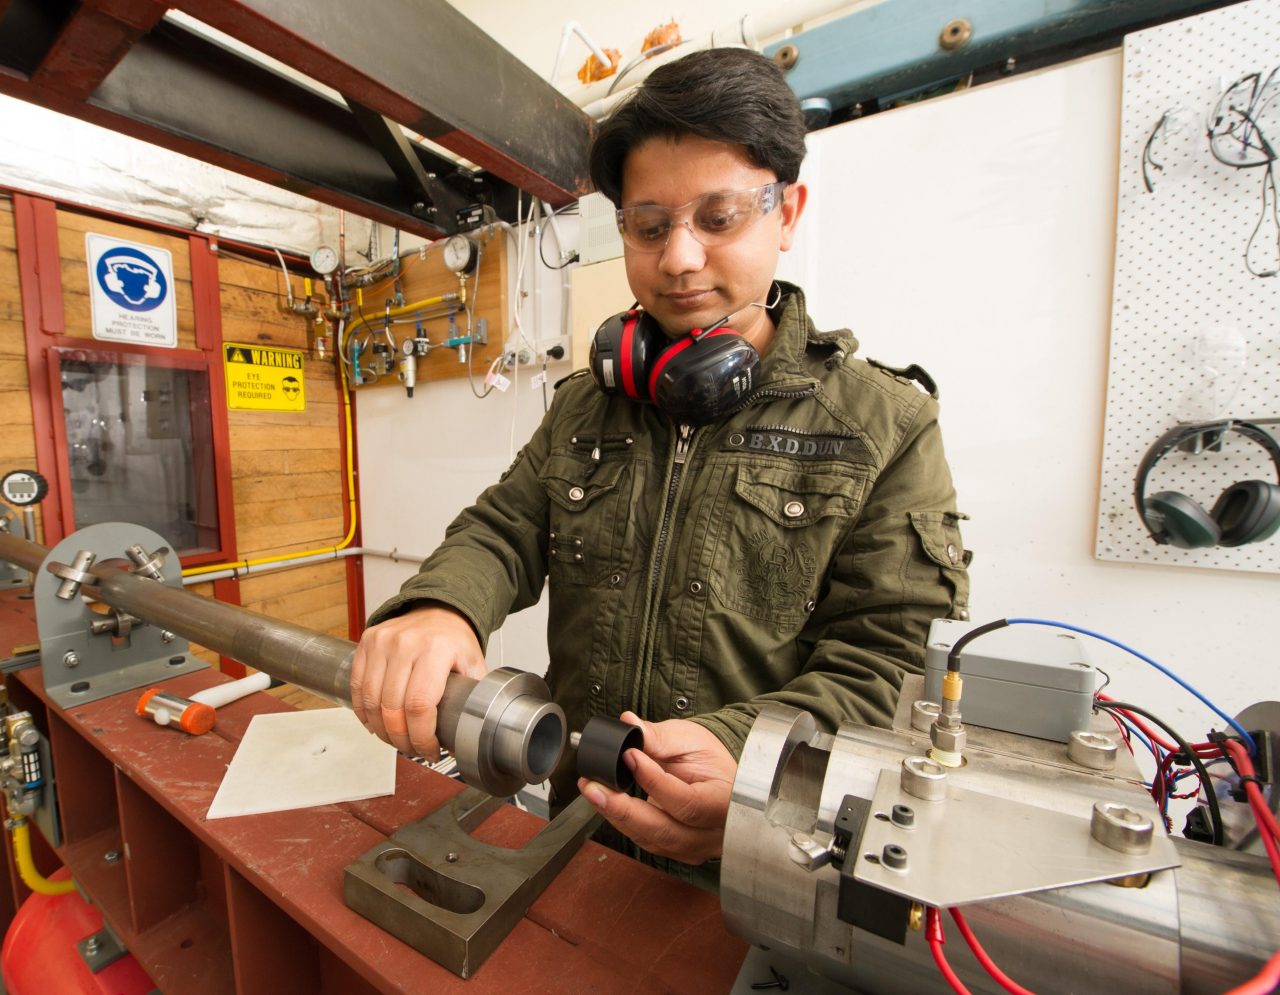 Man working with equipment at workbench